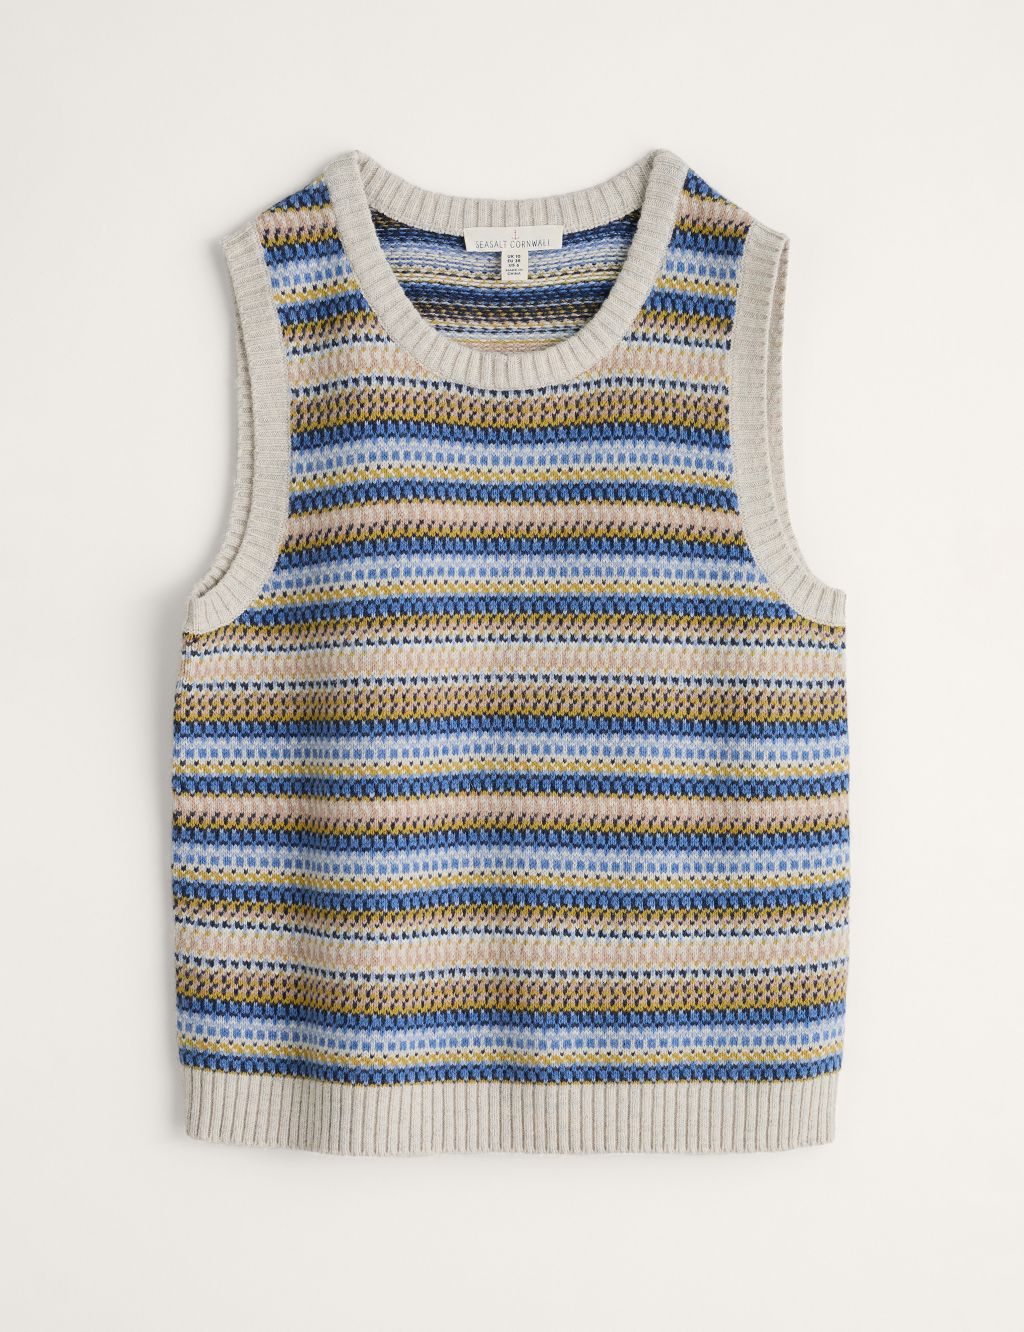 Fair Isle Round Neck Knitted Top with Wool image 2